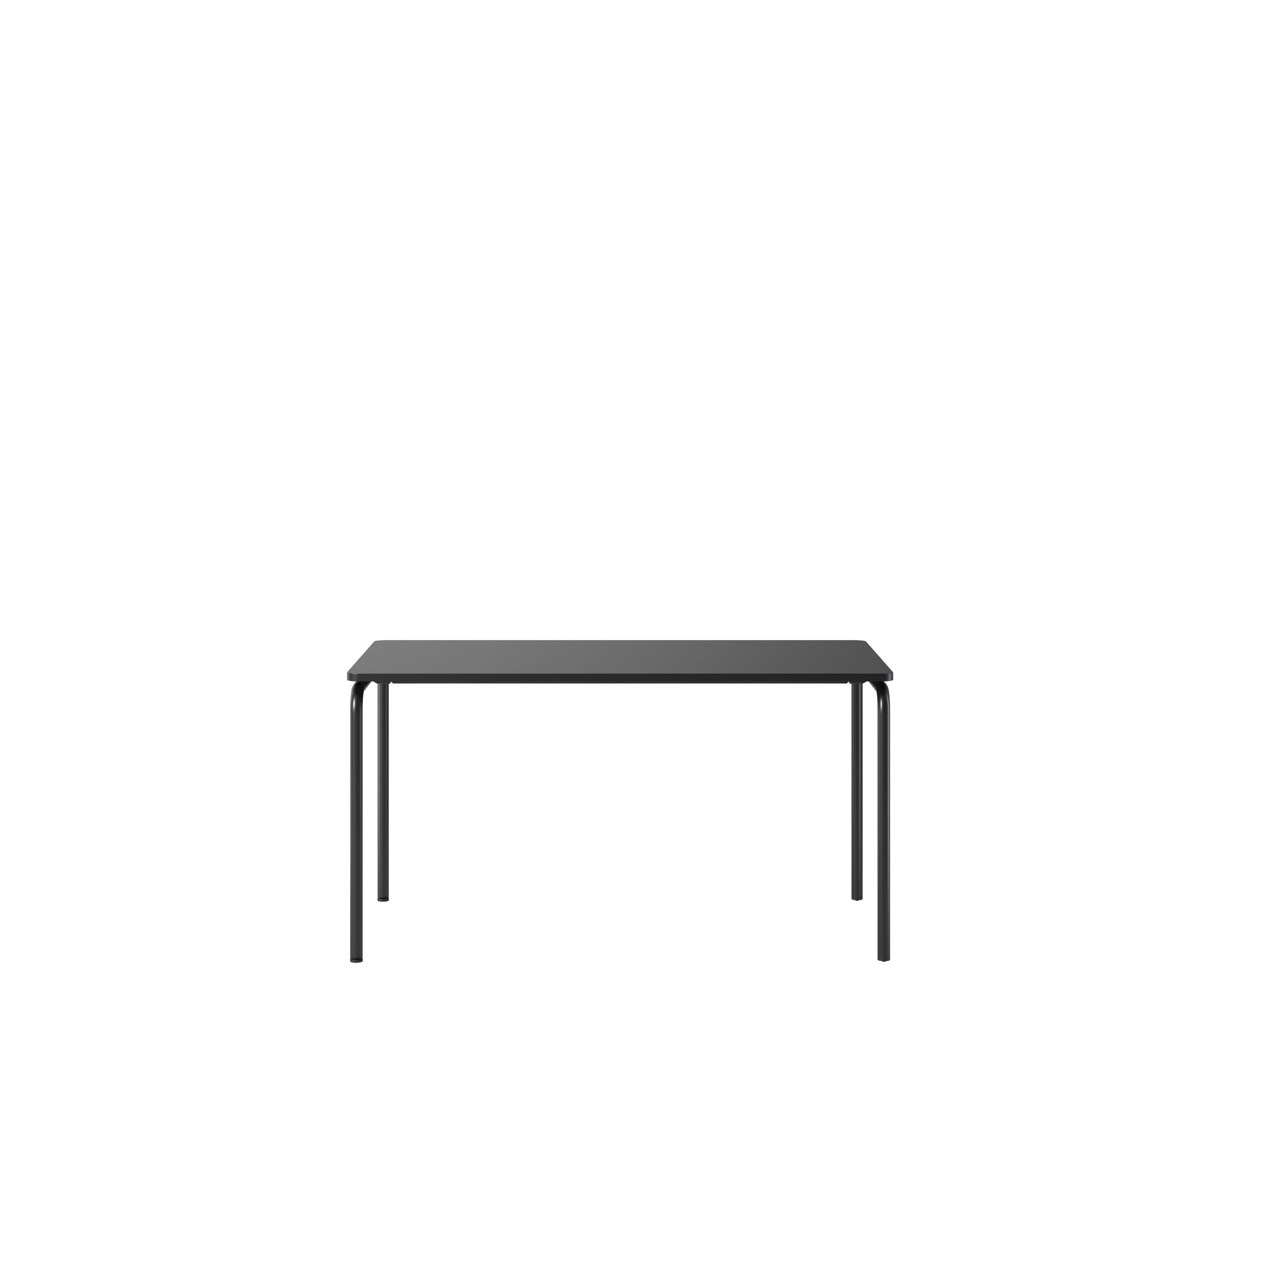 OCEE&FOUR - Tables - FourReal 74 - 140 x 80 - Straight - Packshot Image 1 Large